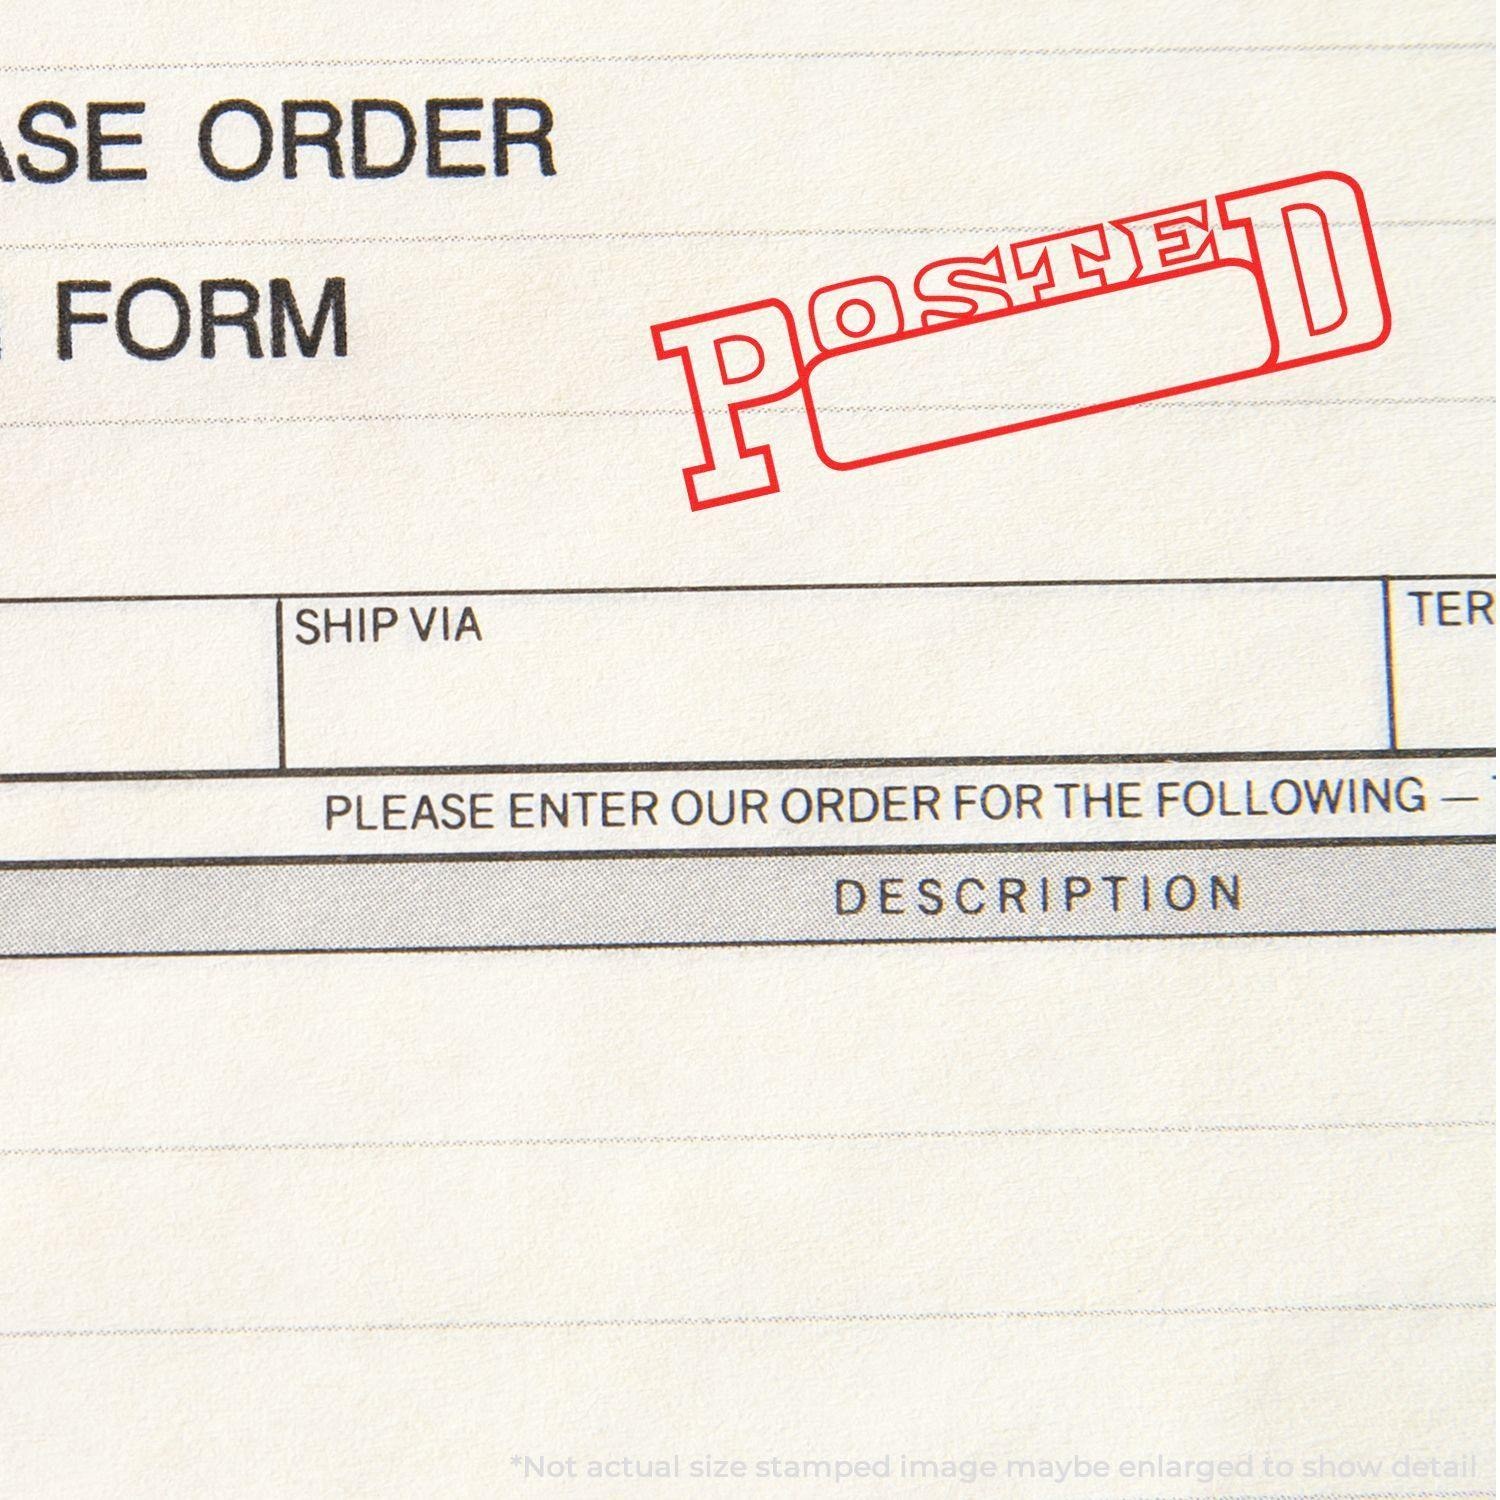 A stock office rubber stamp with a stamped image showing how the text "POSTED" in an outline font with a date box is displayed after stamping.